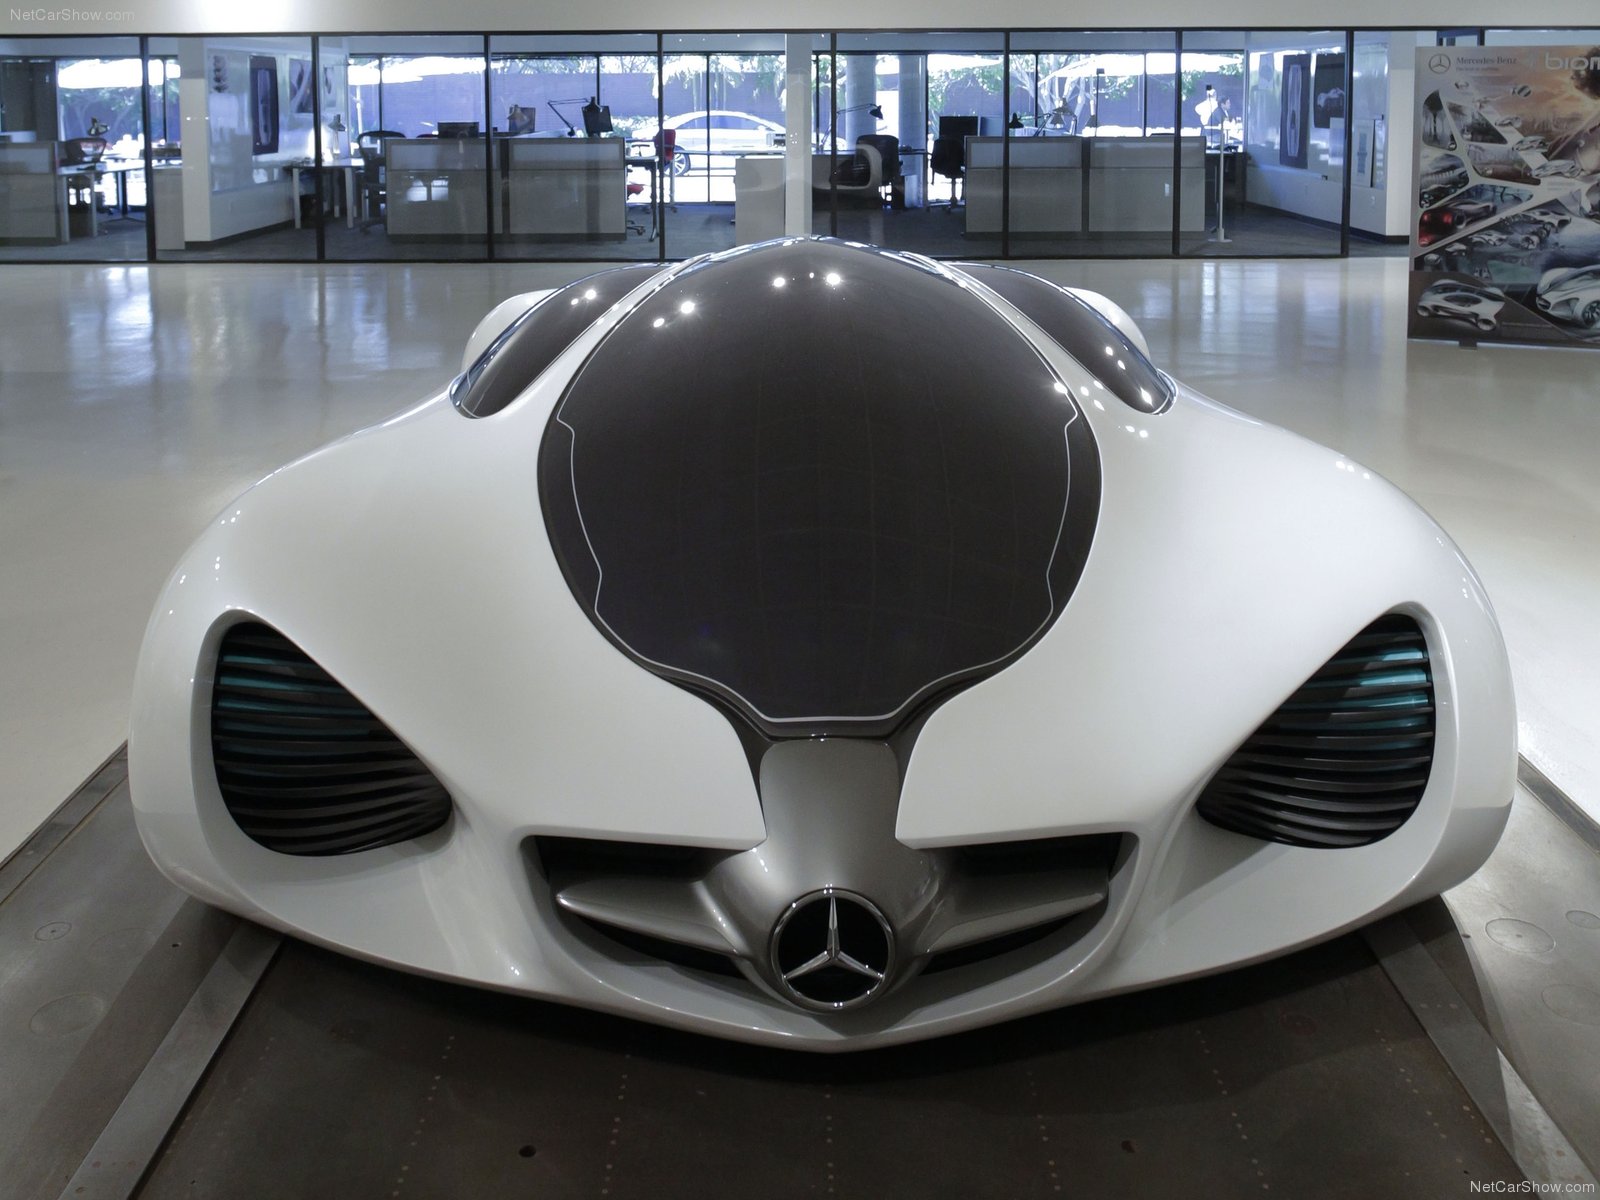 Mercedes Benz Biome Picture. Mercedes Benz Photo Gallery